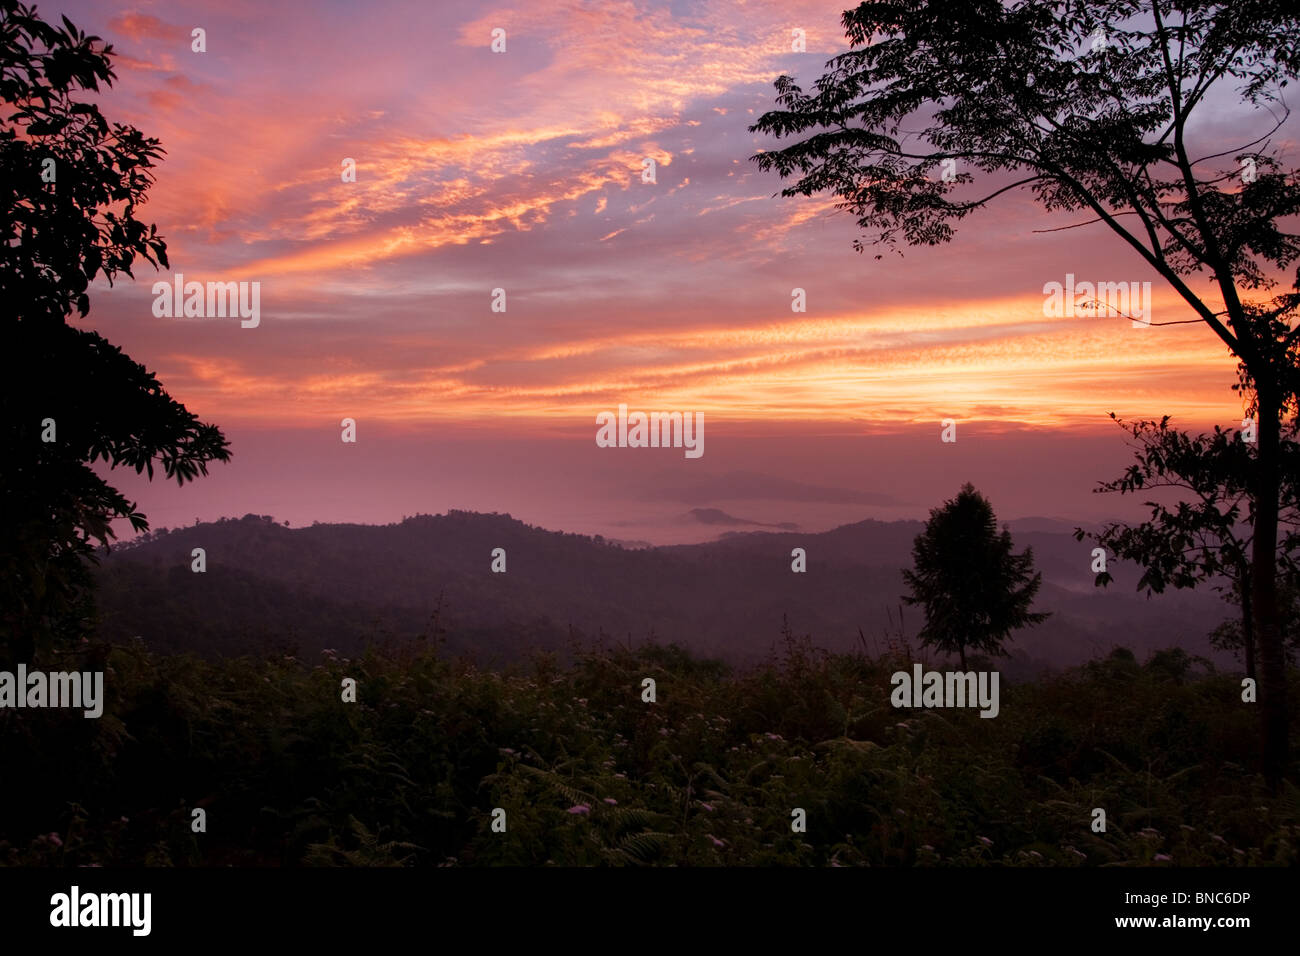 Sunrise view from Doi Lang looking out over forested valleys, Thailand Stock Photo